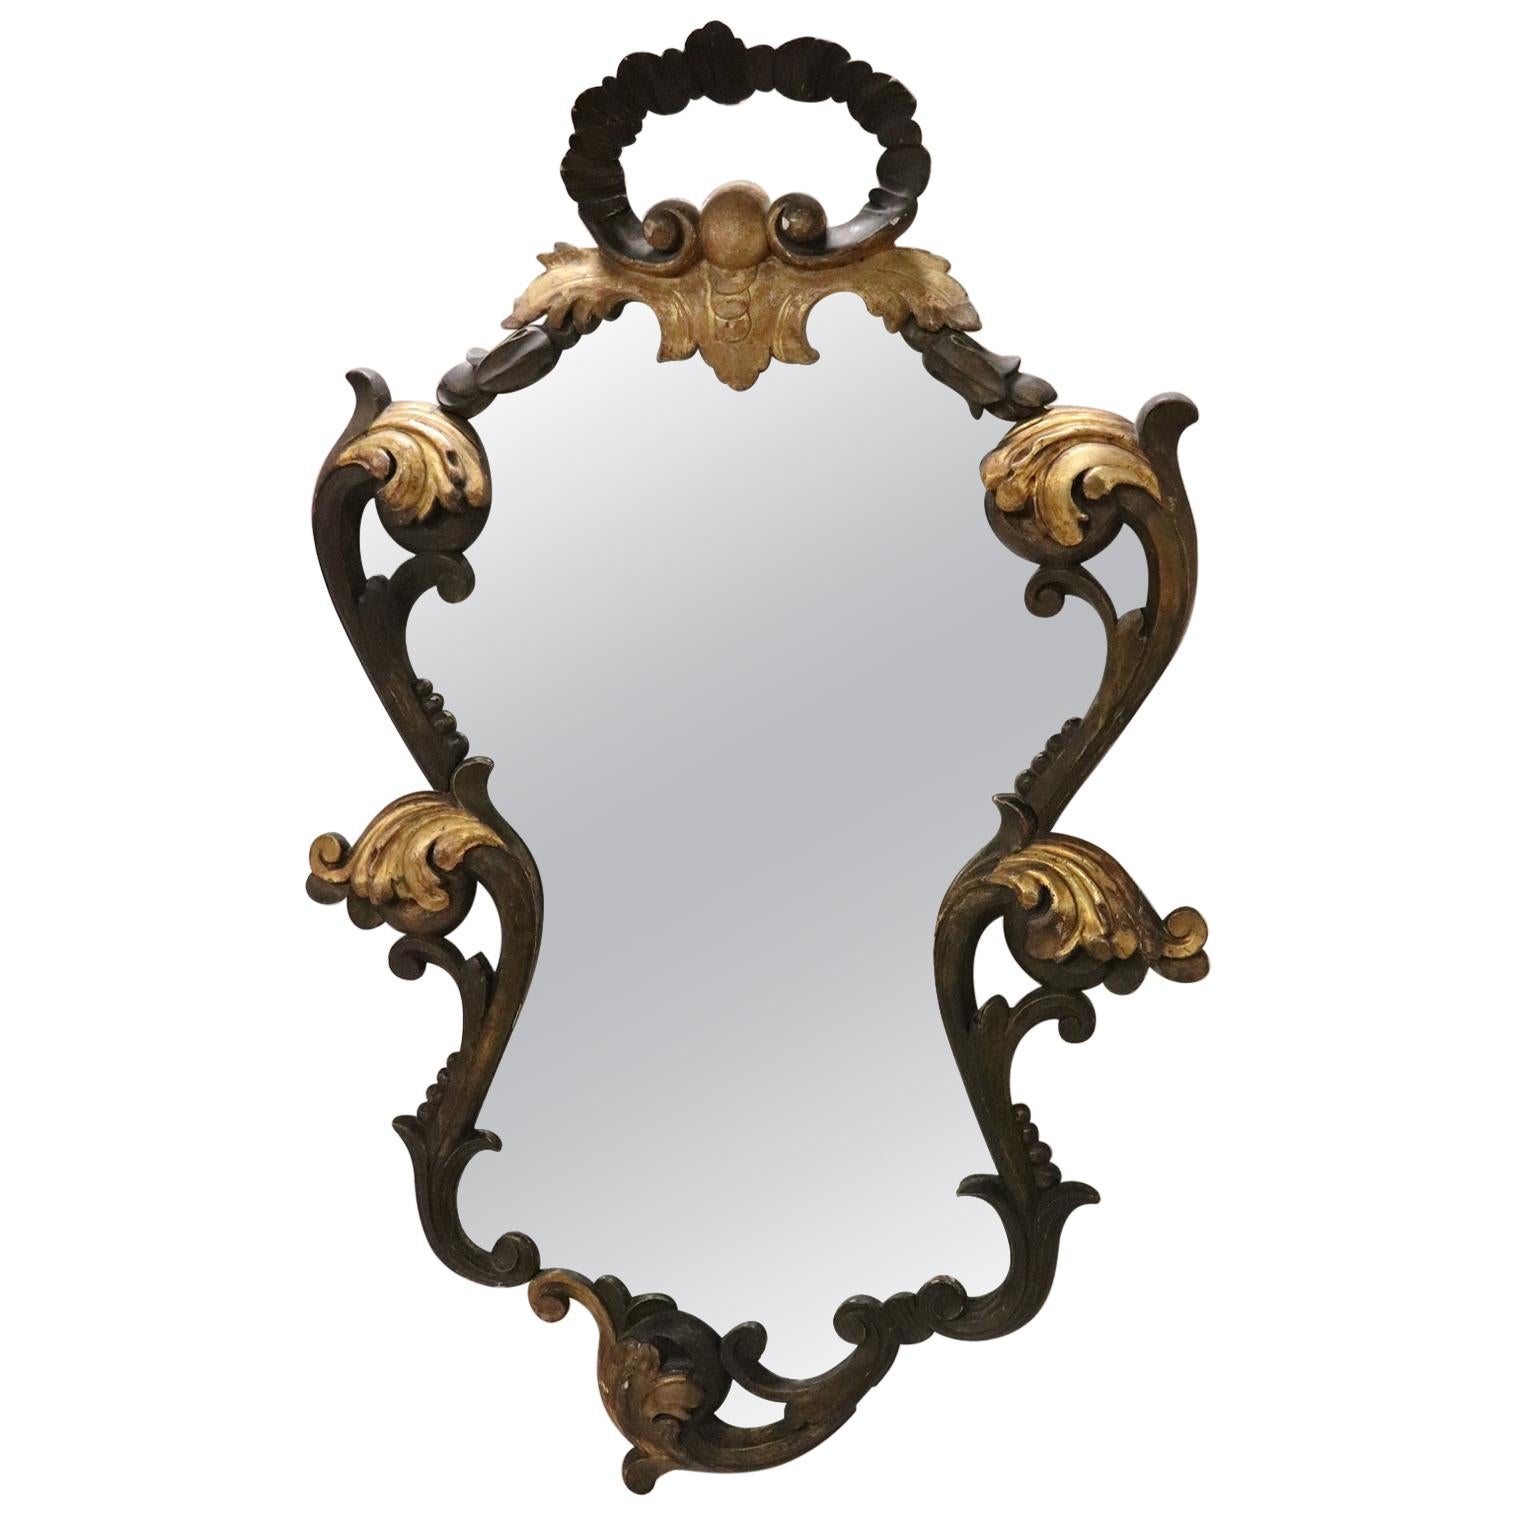 20th Century Italian Baroque Style Carved and Gilded Wood Wall Mirror